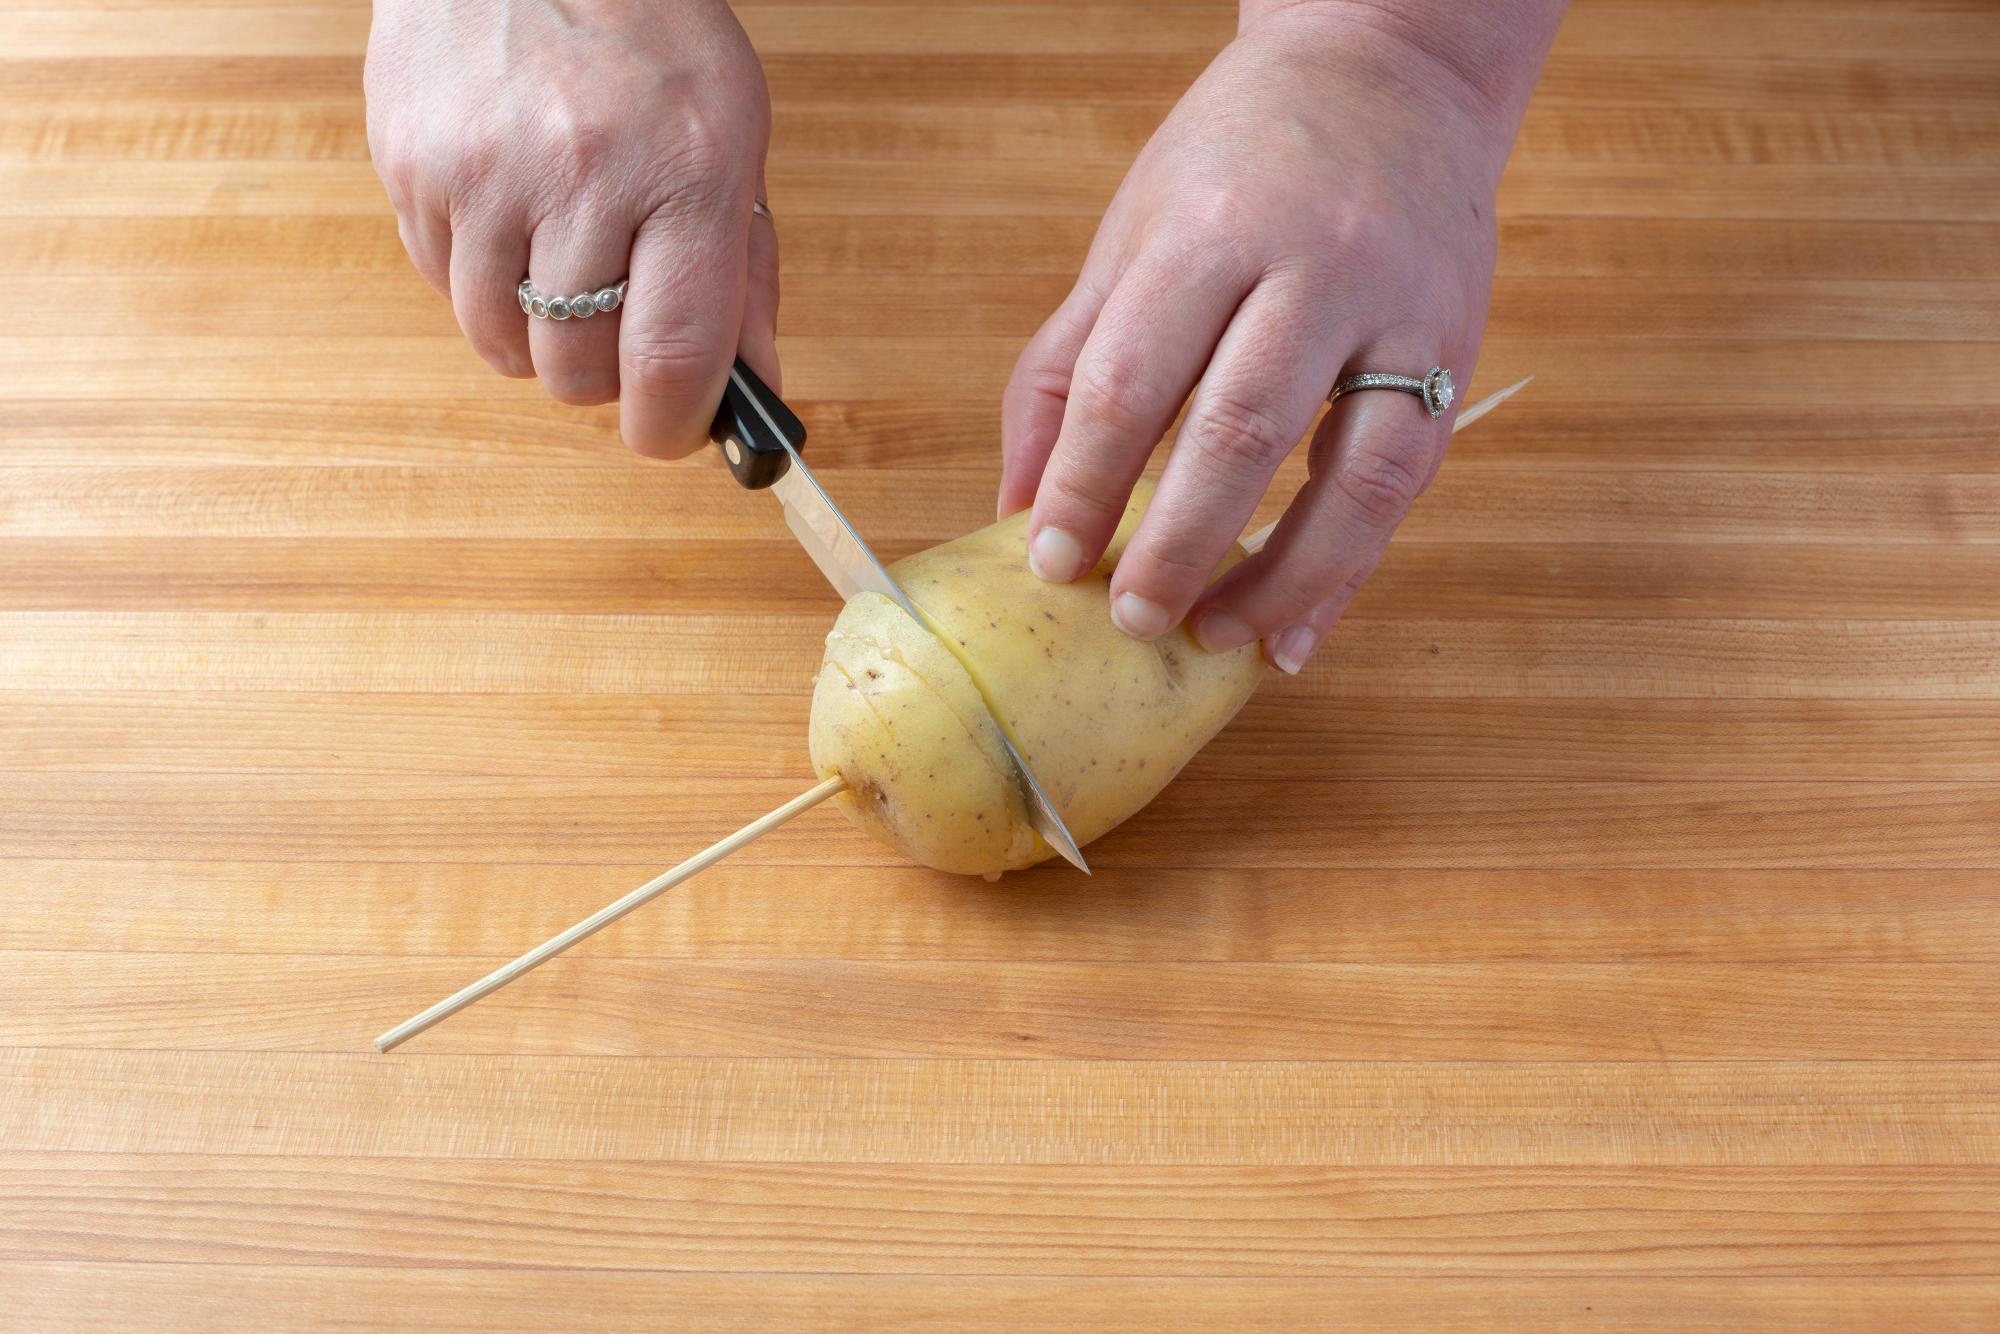 Using the 4 Inch Paring knife to cut the potato.